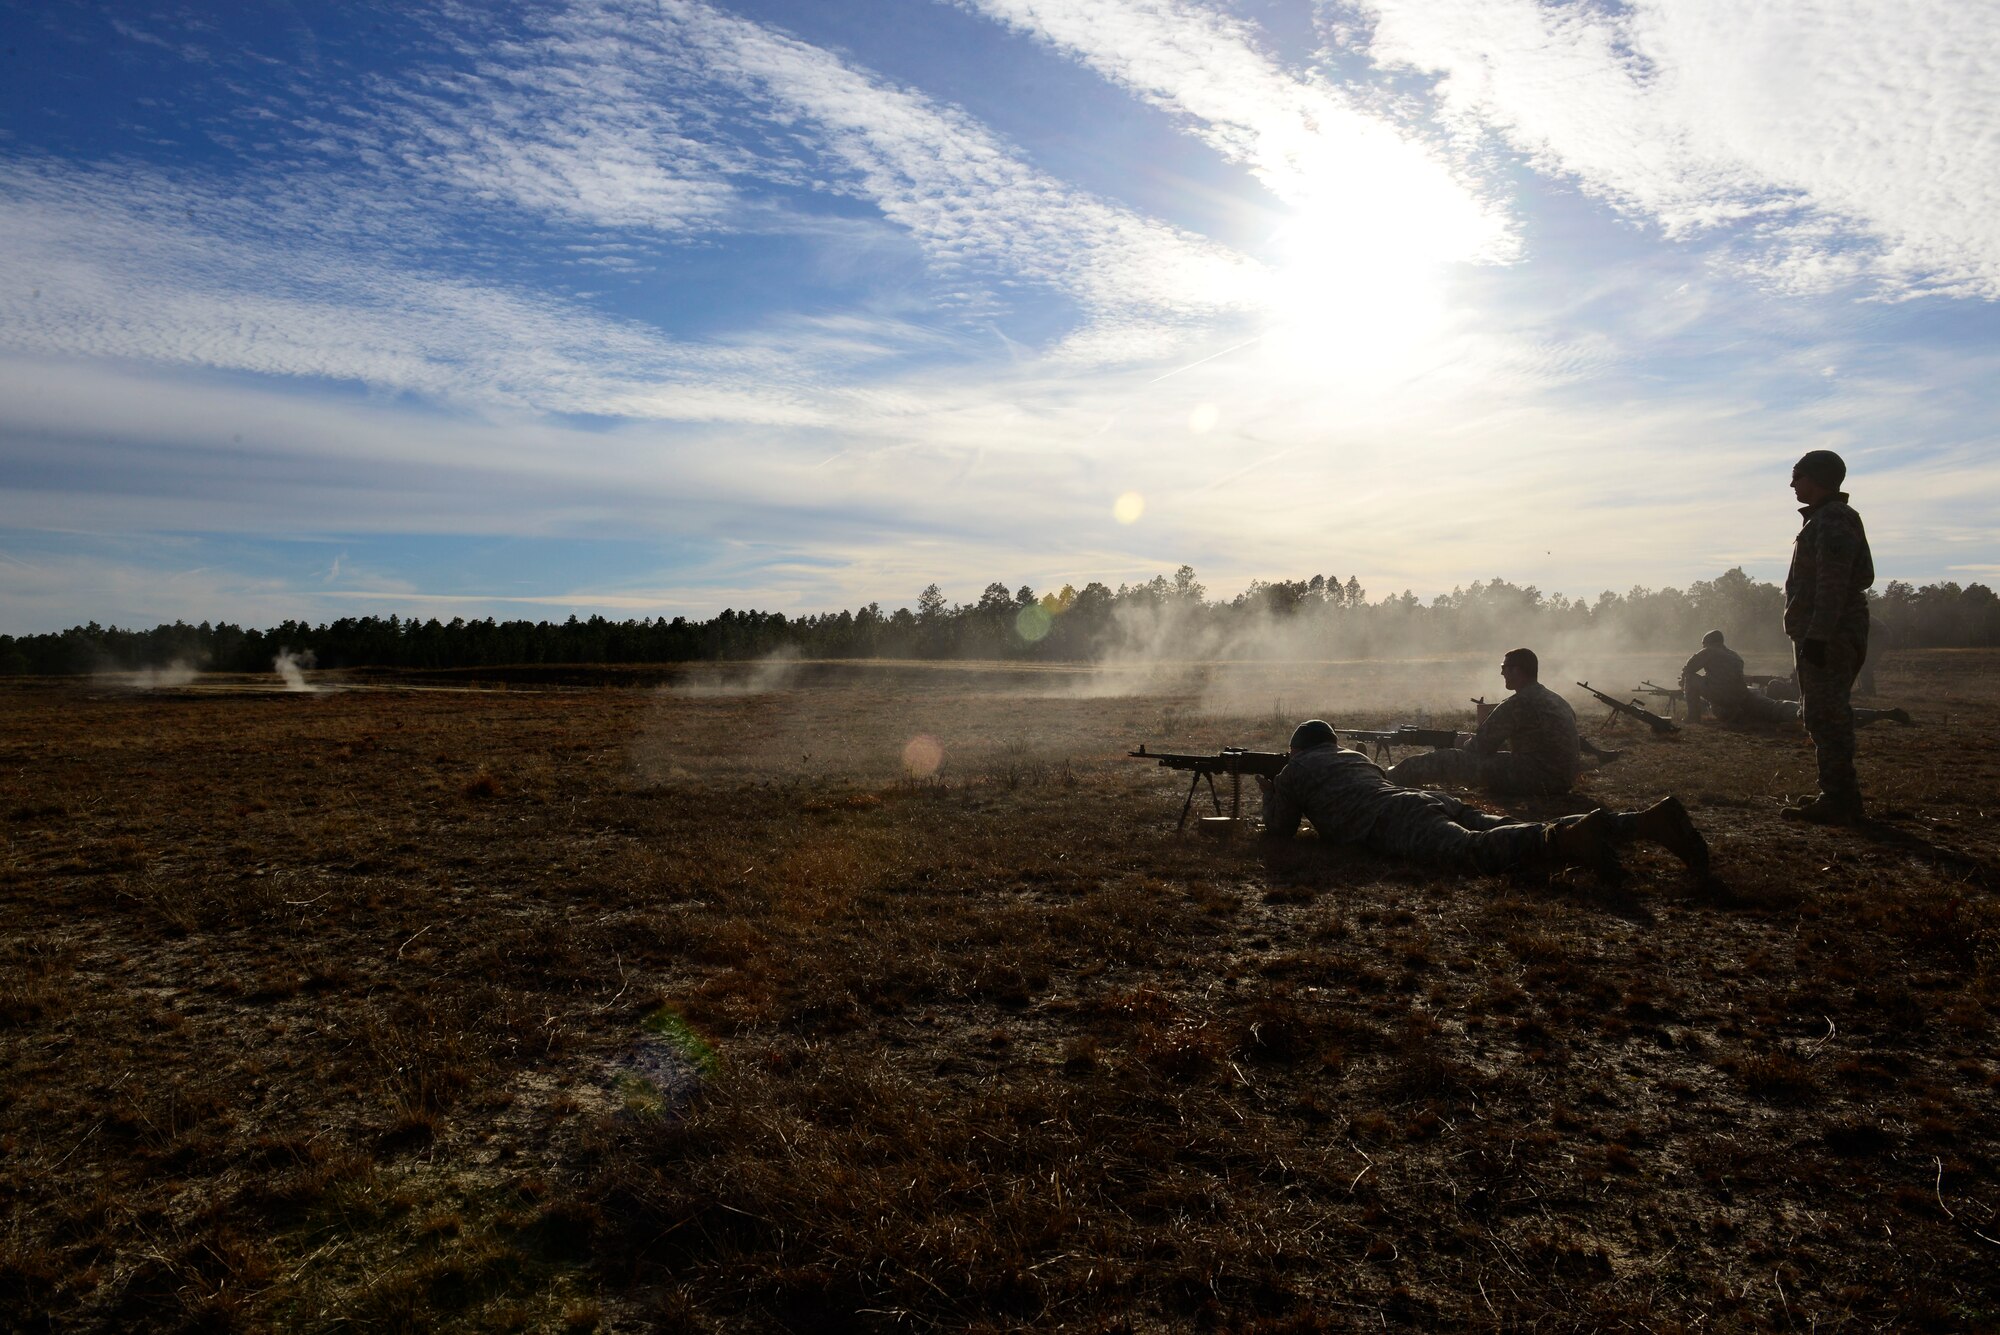 U.S. Army National Guard soldiers assigned to the 1st Battalion, 169th Aviation Regiment, Ft. Bragg, N.C., shoot M240 machine guns at Poinsett Electronic Combat Range, Sumter, S.C., Feb. 6, 2015. In 2013, there were a total of 1,070 bombs dropped on Poinsett. (U.S. Air Force photo by Airman 1st Class Diana M. Cossaboom/Released)